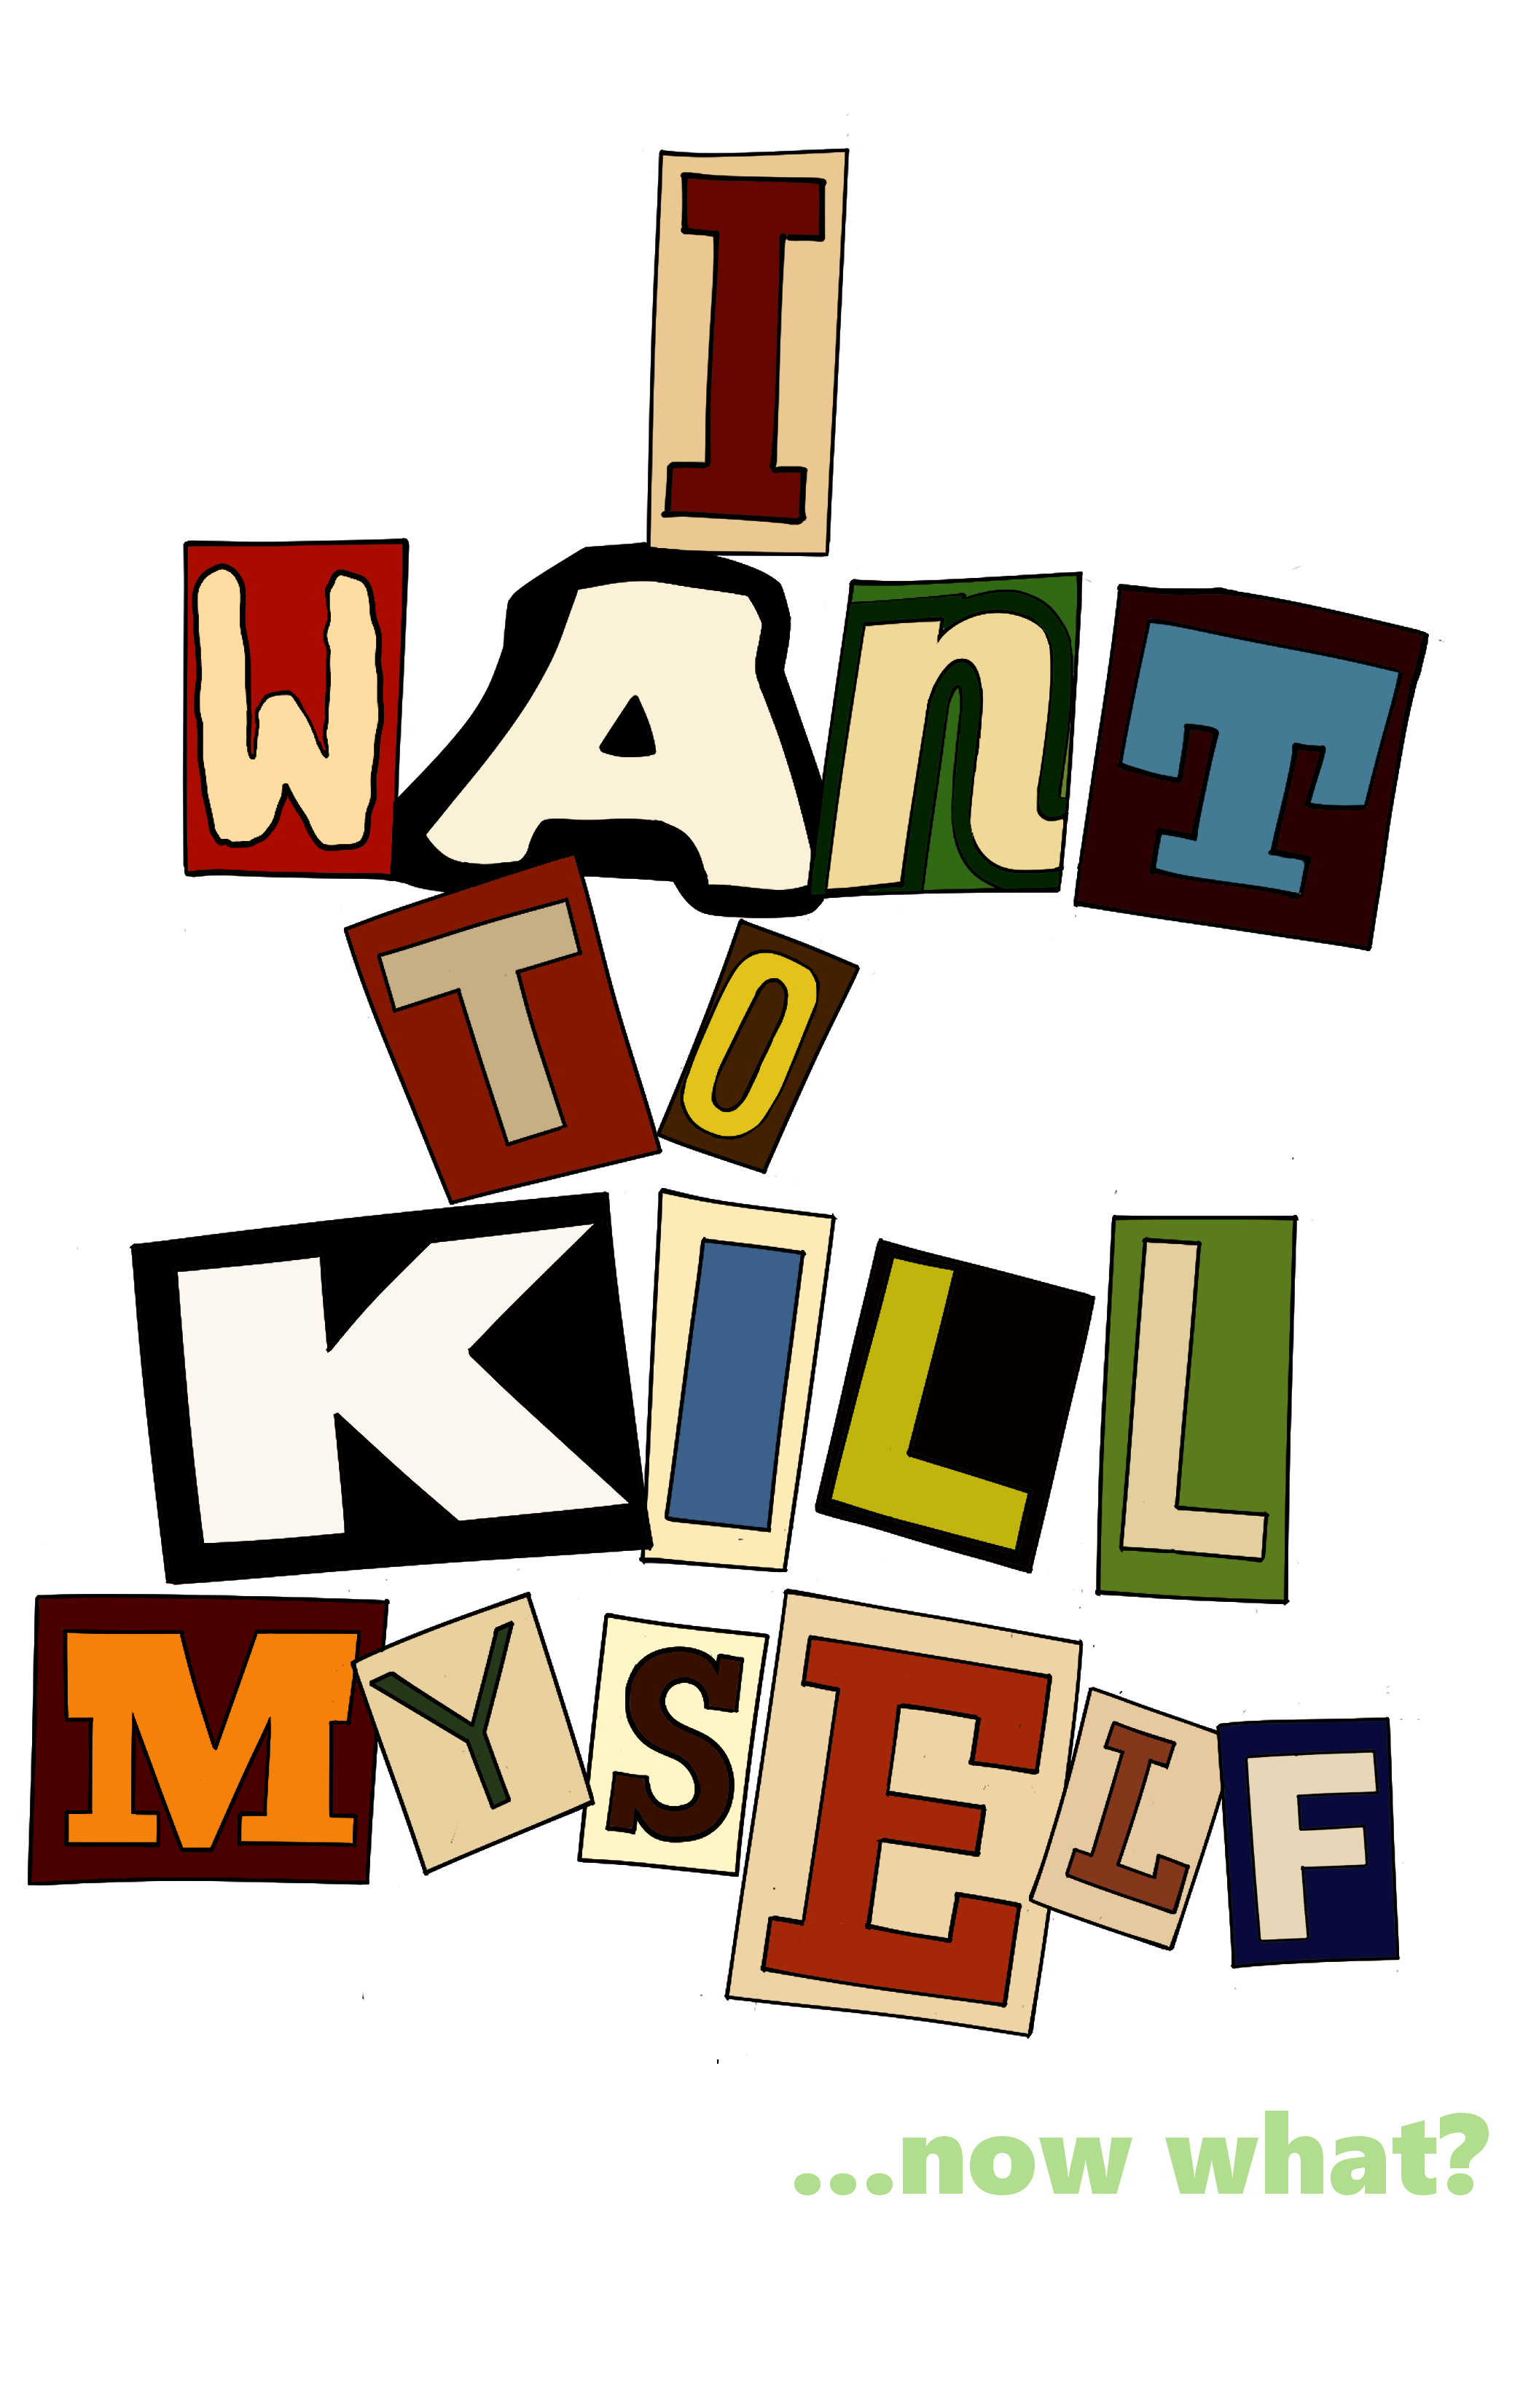 I want to kill myself ...now what?